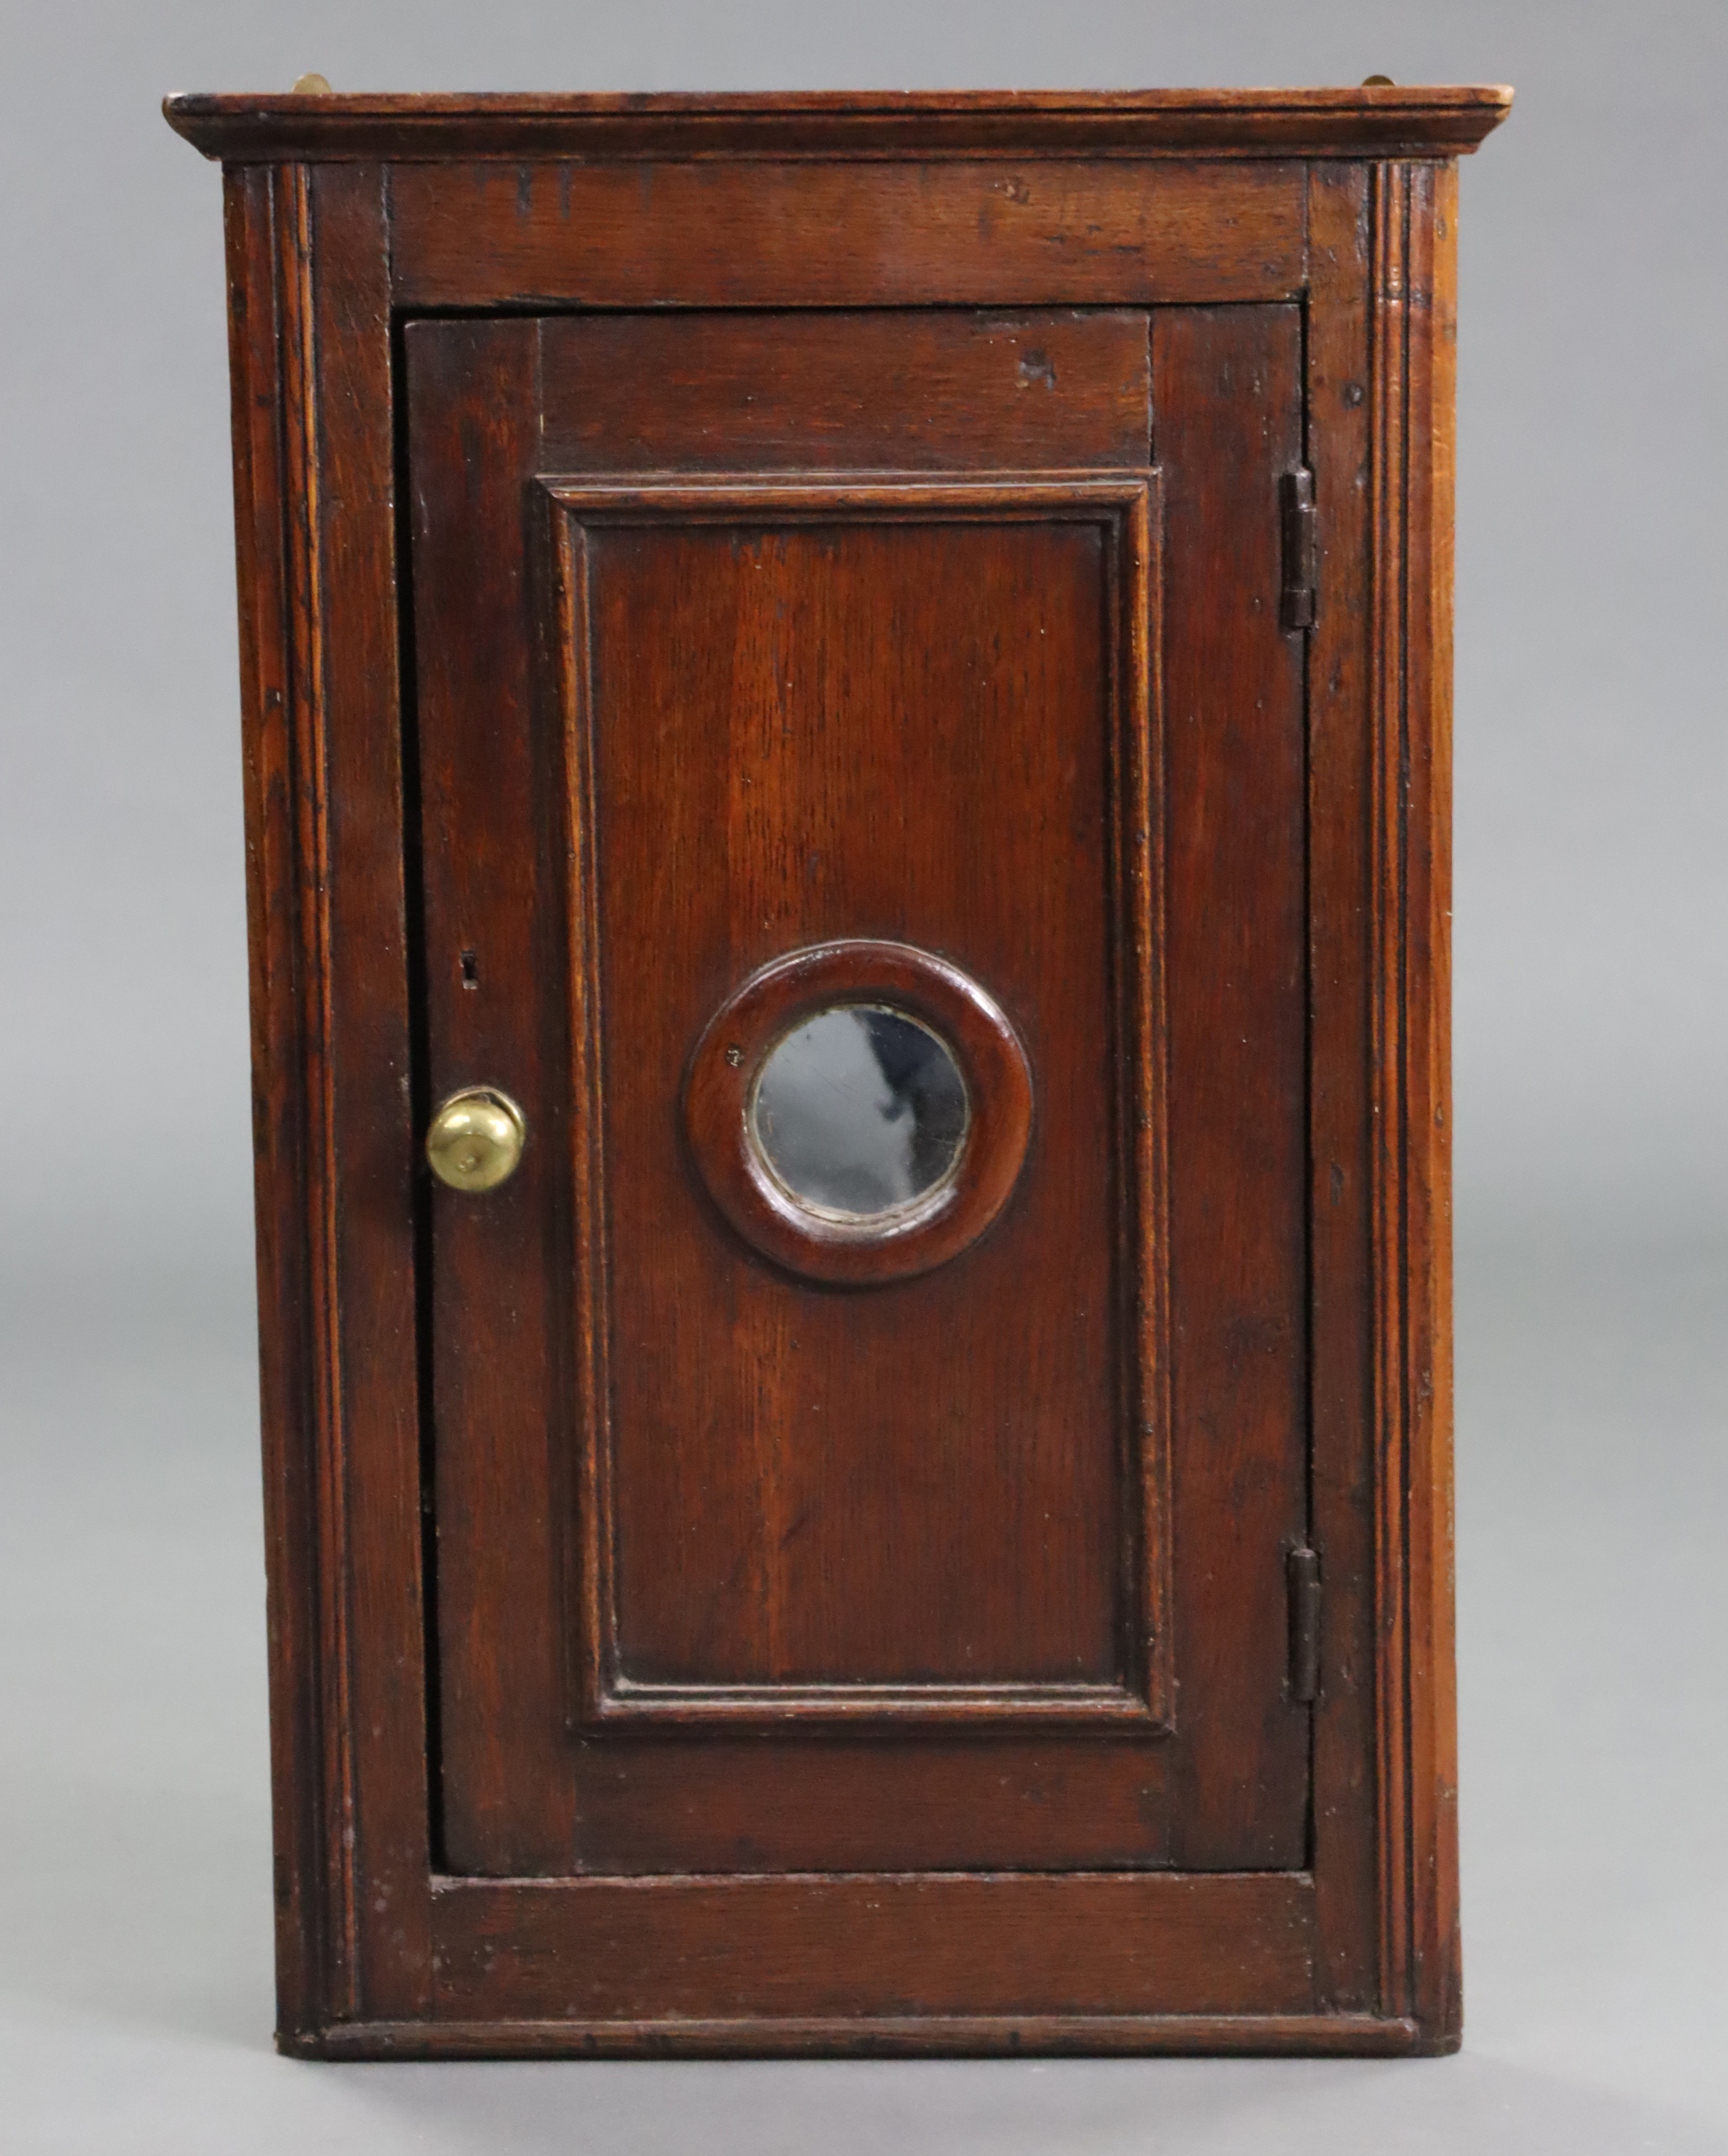 A 19th century oak small hanging corner cupboard, with moulded cornice & edges, fitted two shelves